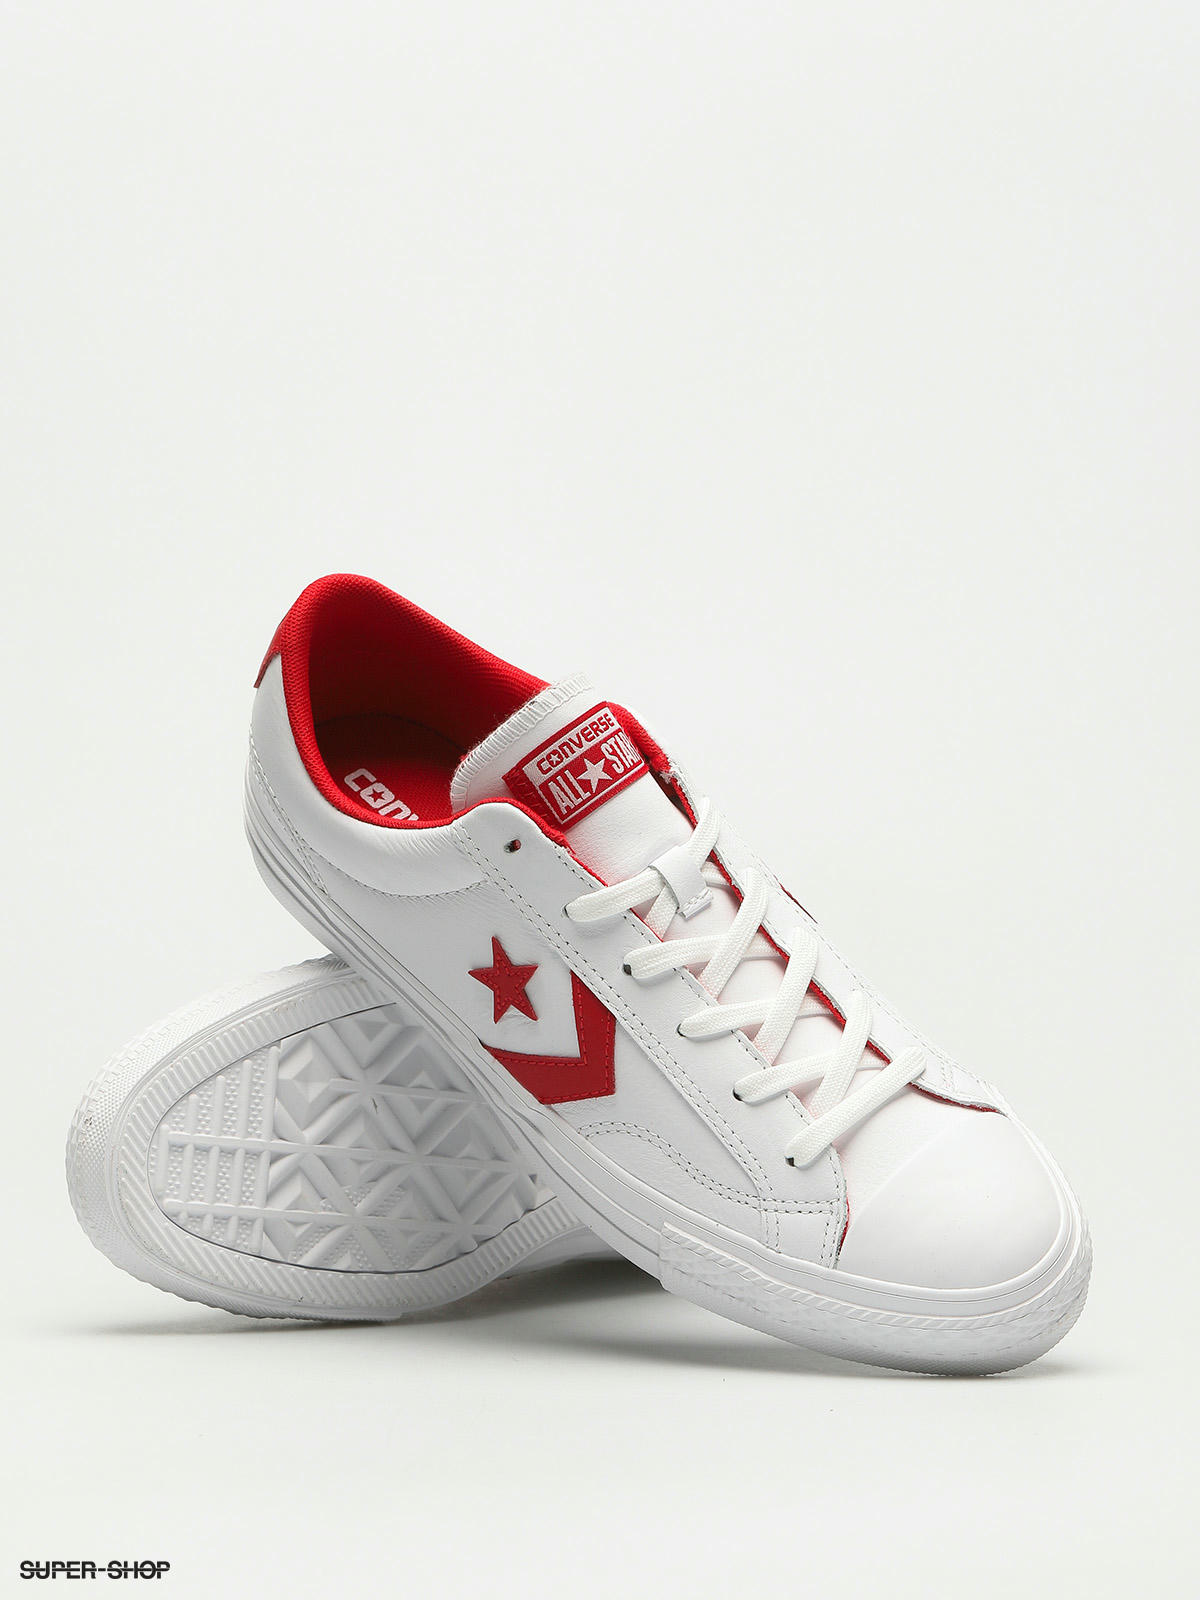 converse star player ox red